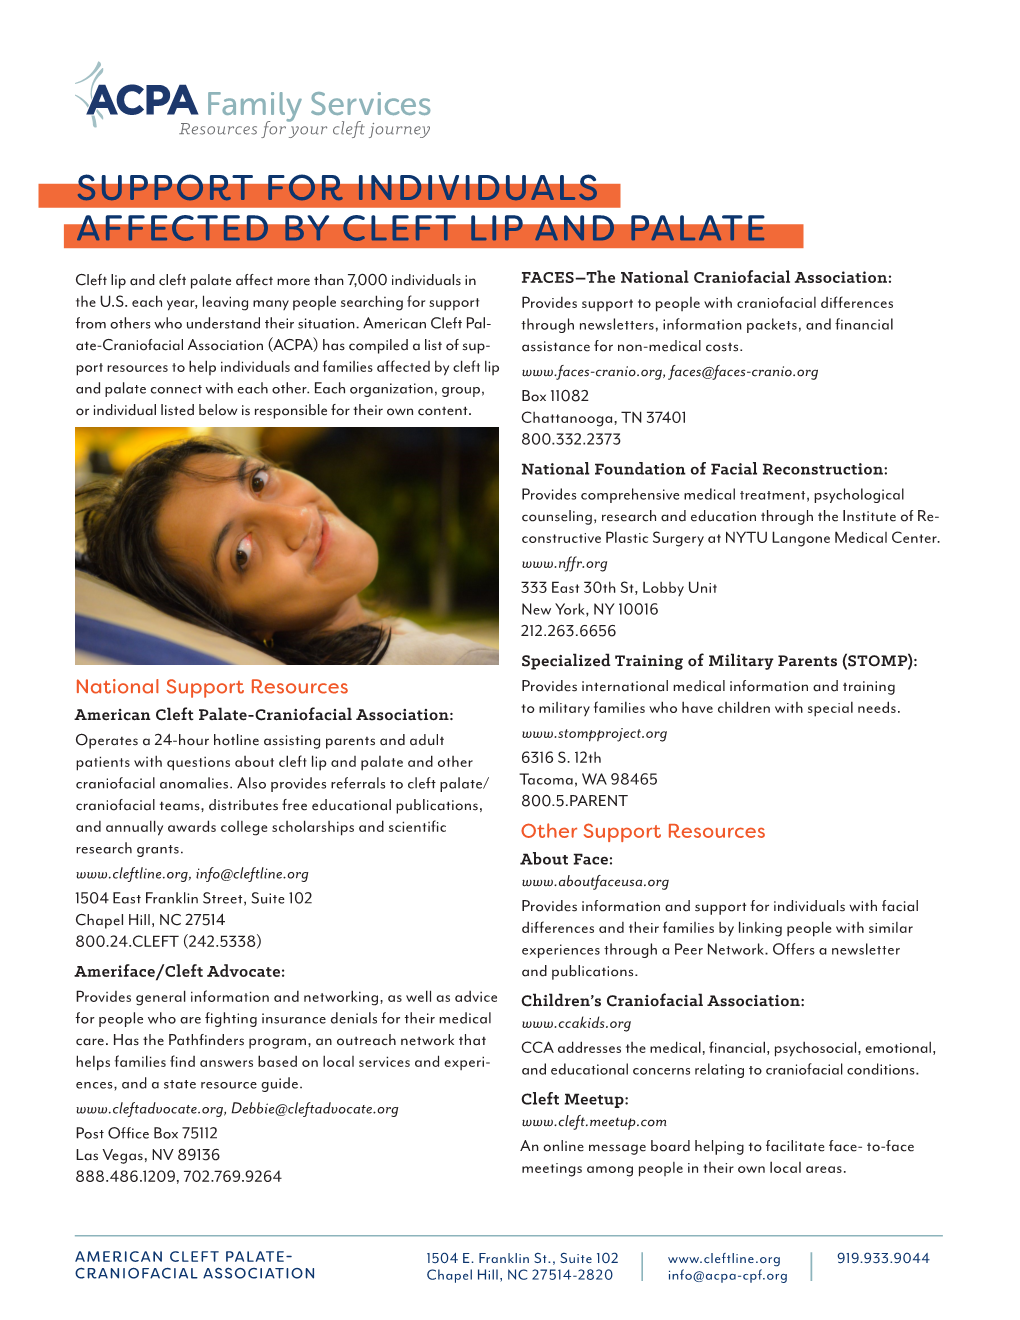 Support for Individuals Affected by Cleft Lip and Palate